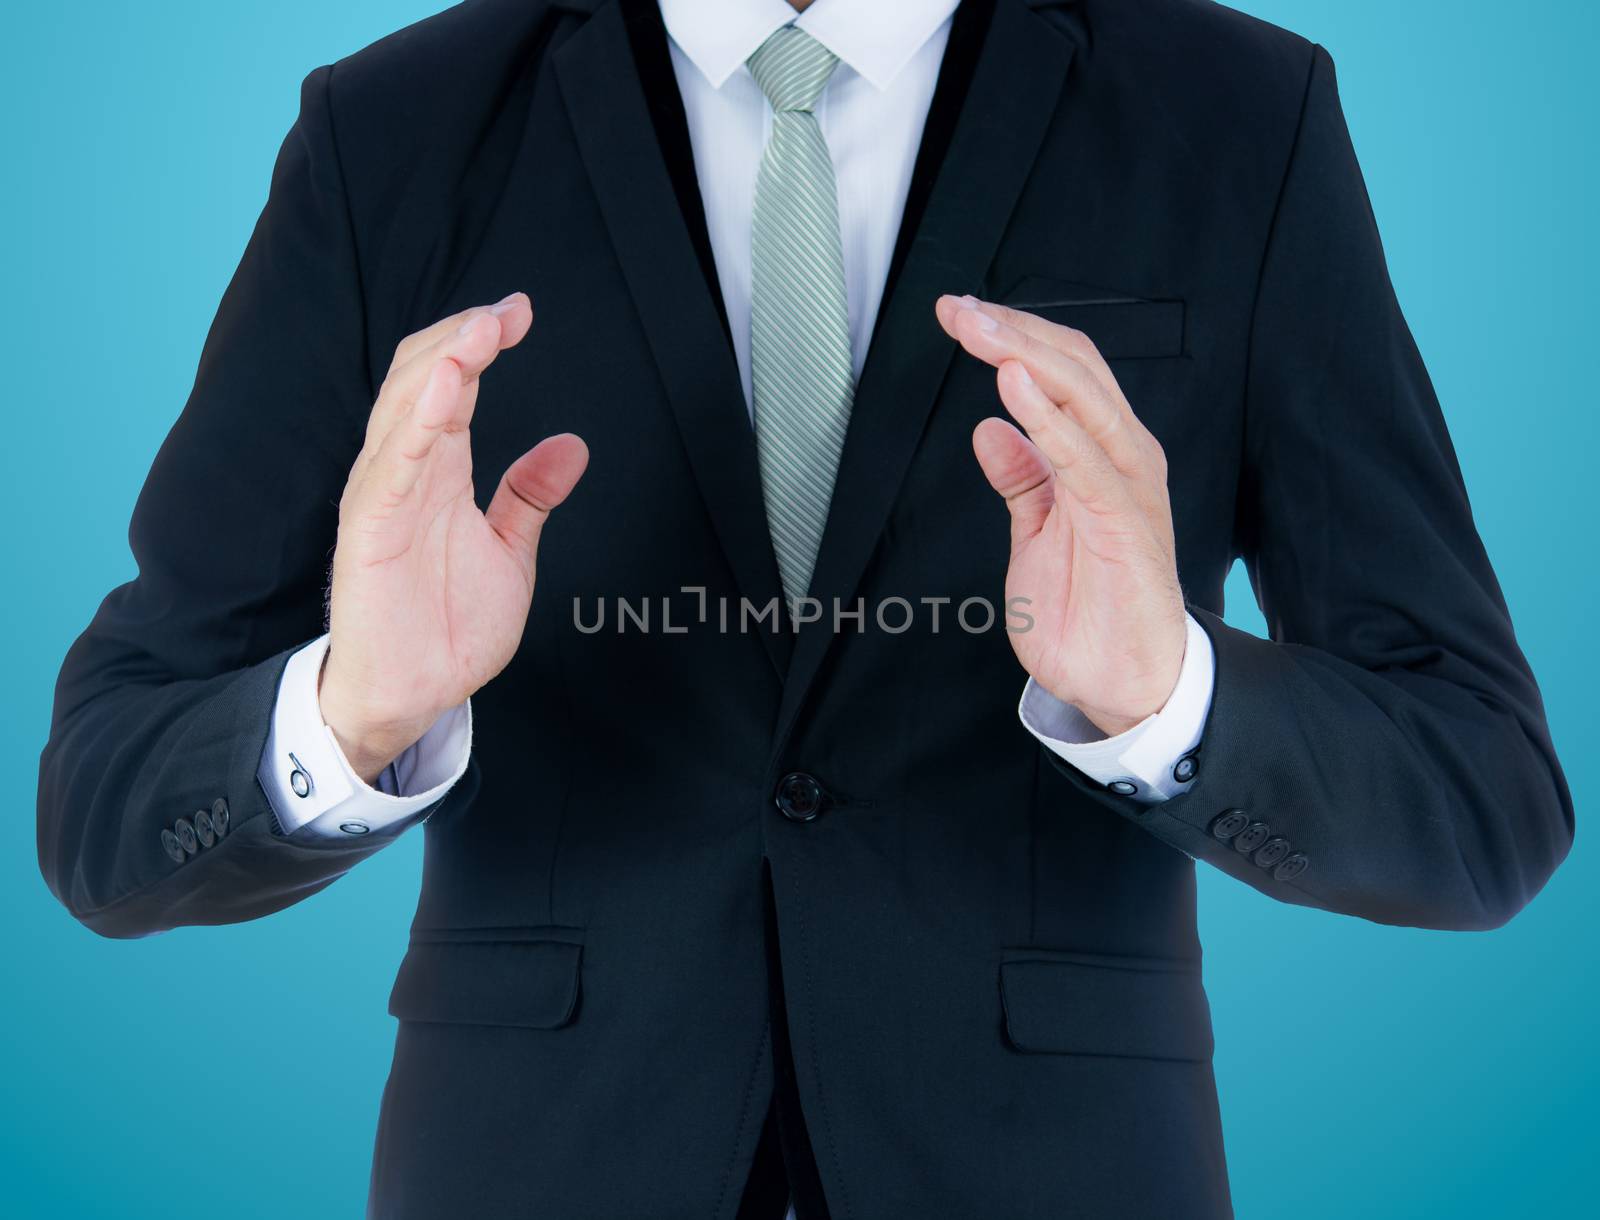 Businessman standing posture show hand isolated on over blue background